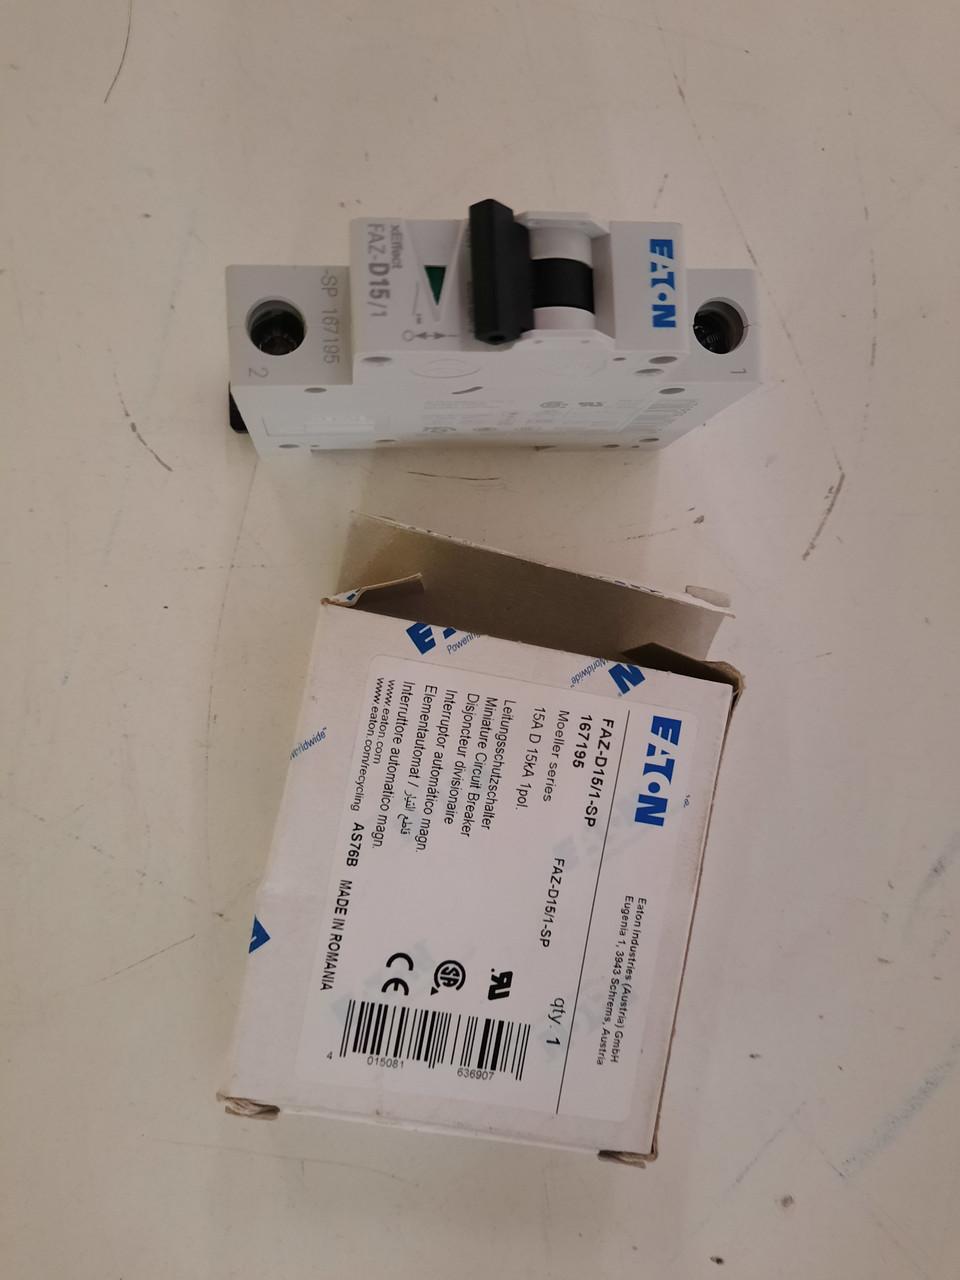 Eaton FAZ-D15/1-SP Eaton FAZ supplementary protector,UL 1077 Industrial miniature circuit breaker-supplementary protector,Single package,High levels of inrush current are expected,15 A,15 kAIC,Single-pole,277 V,10-20X/n,Q38,50-60 Hz,Standard terminals,D Curve